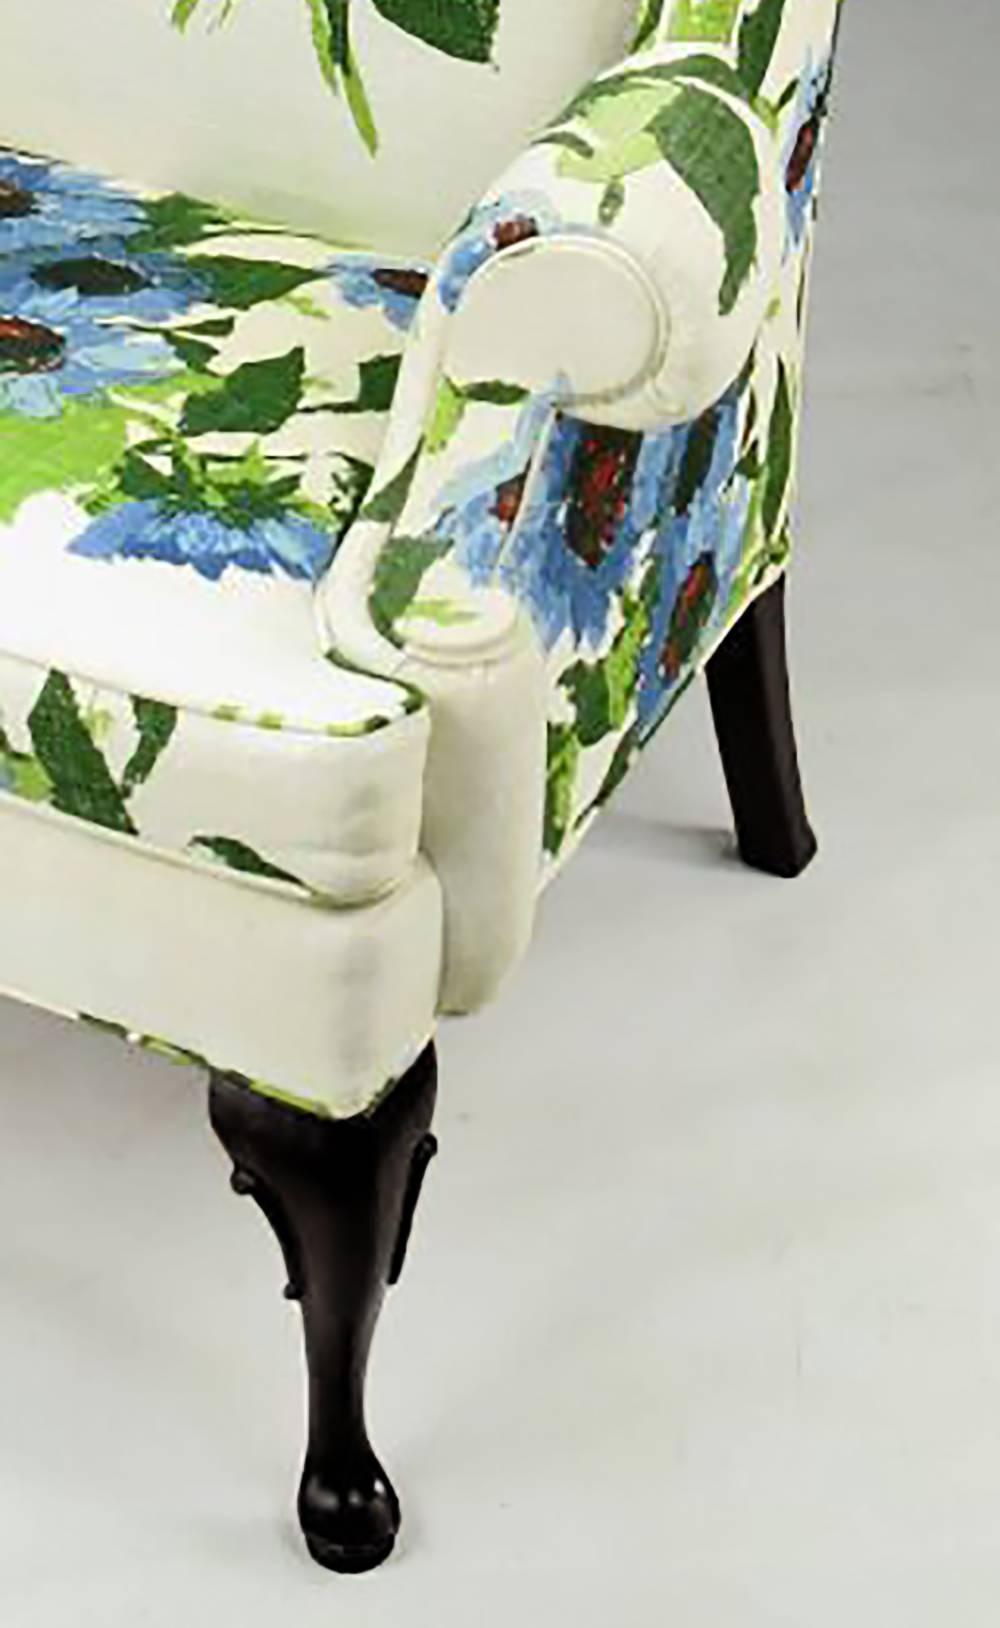 floral wing chair